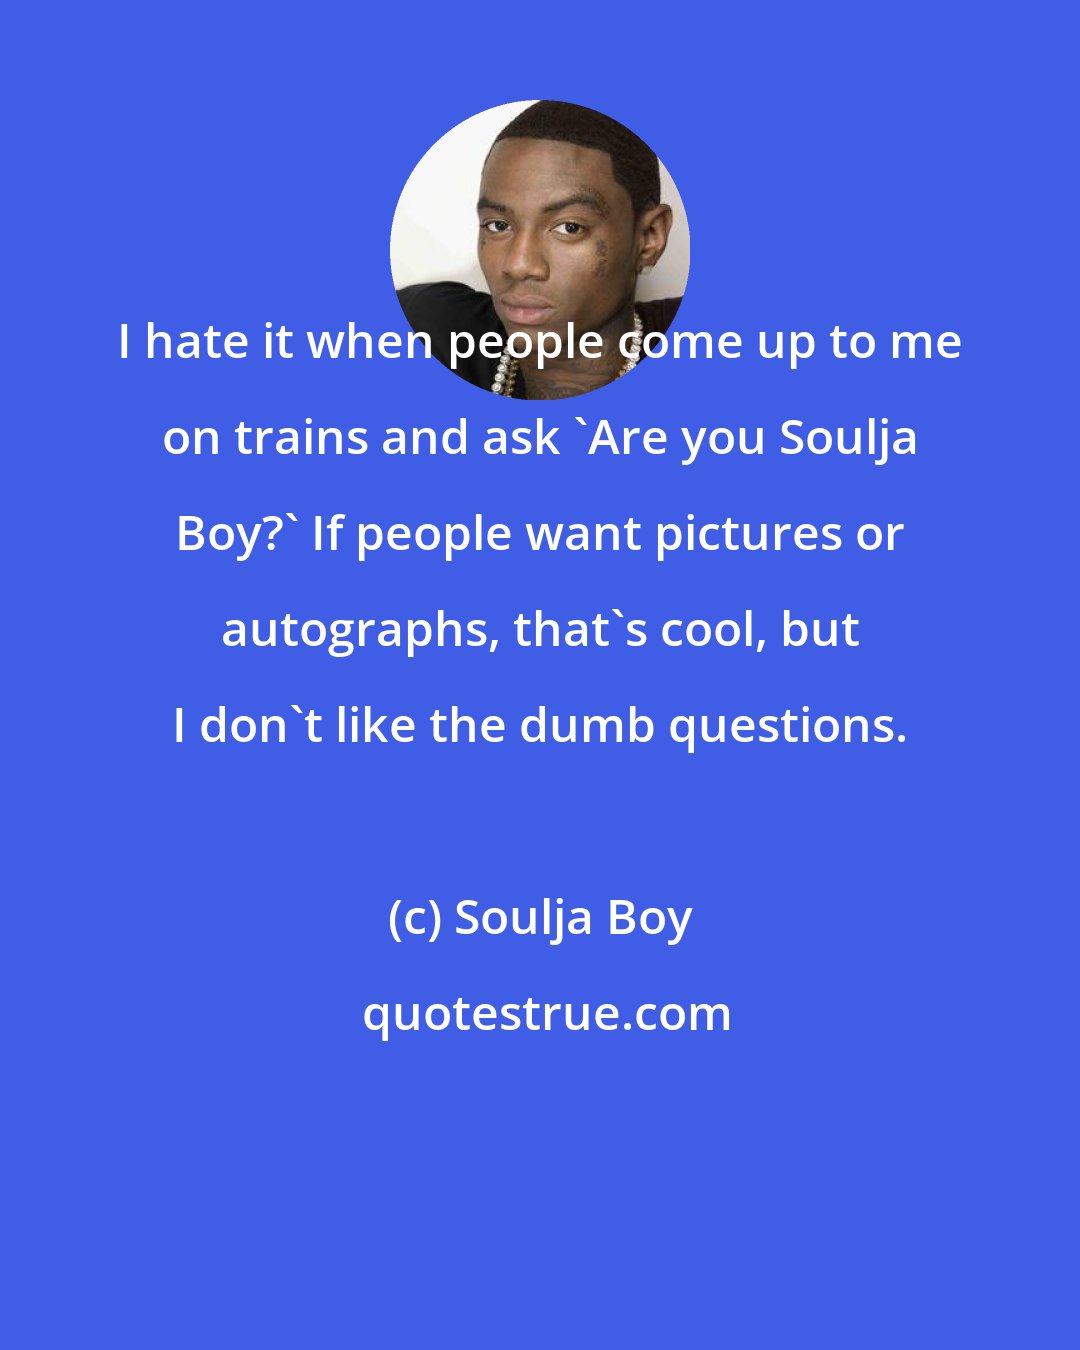 Soulja Boy: I hate it when people come up to me on trains and ask 'Are you Soulja Boy?' If people want pictures or autographs, that's cool, but I don't like the dumb questions.